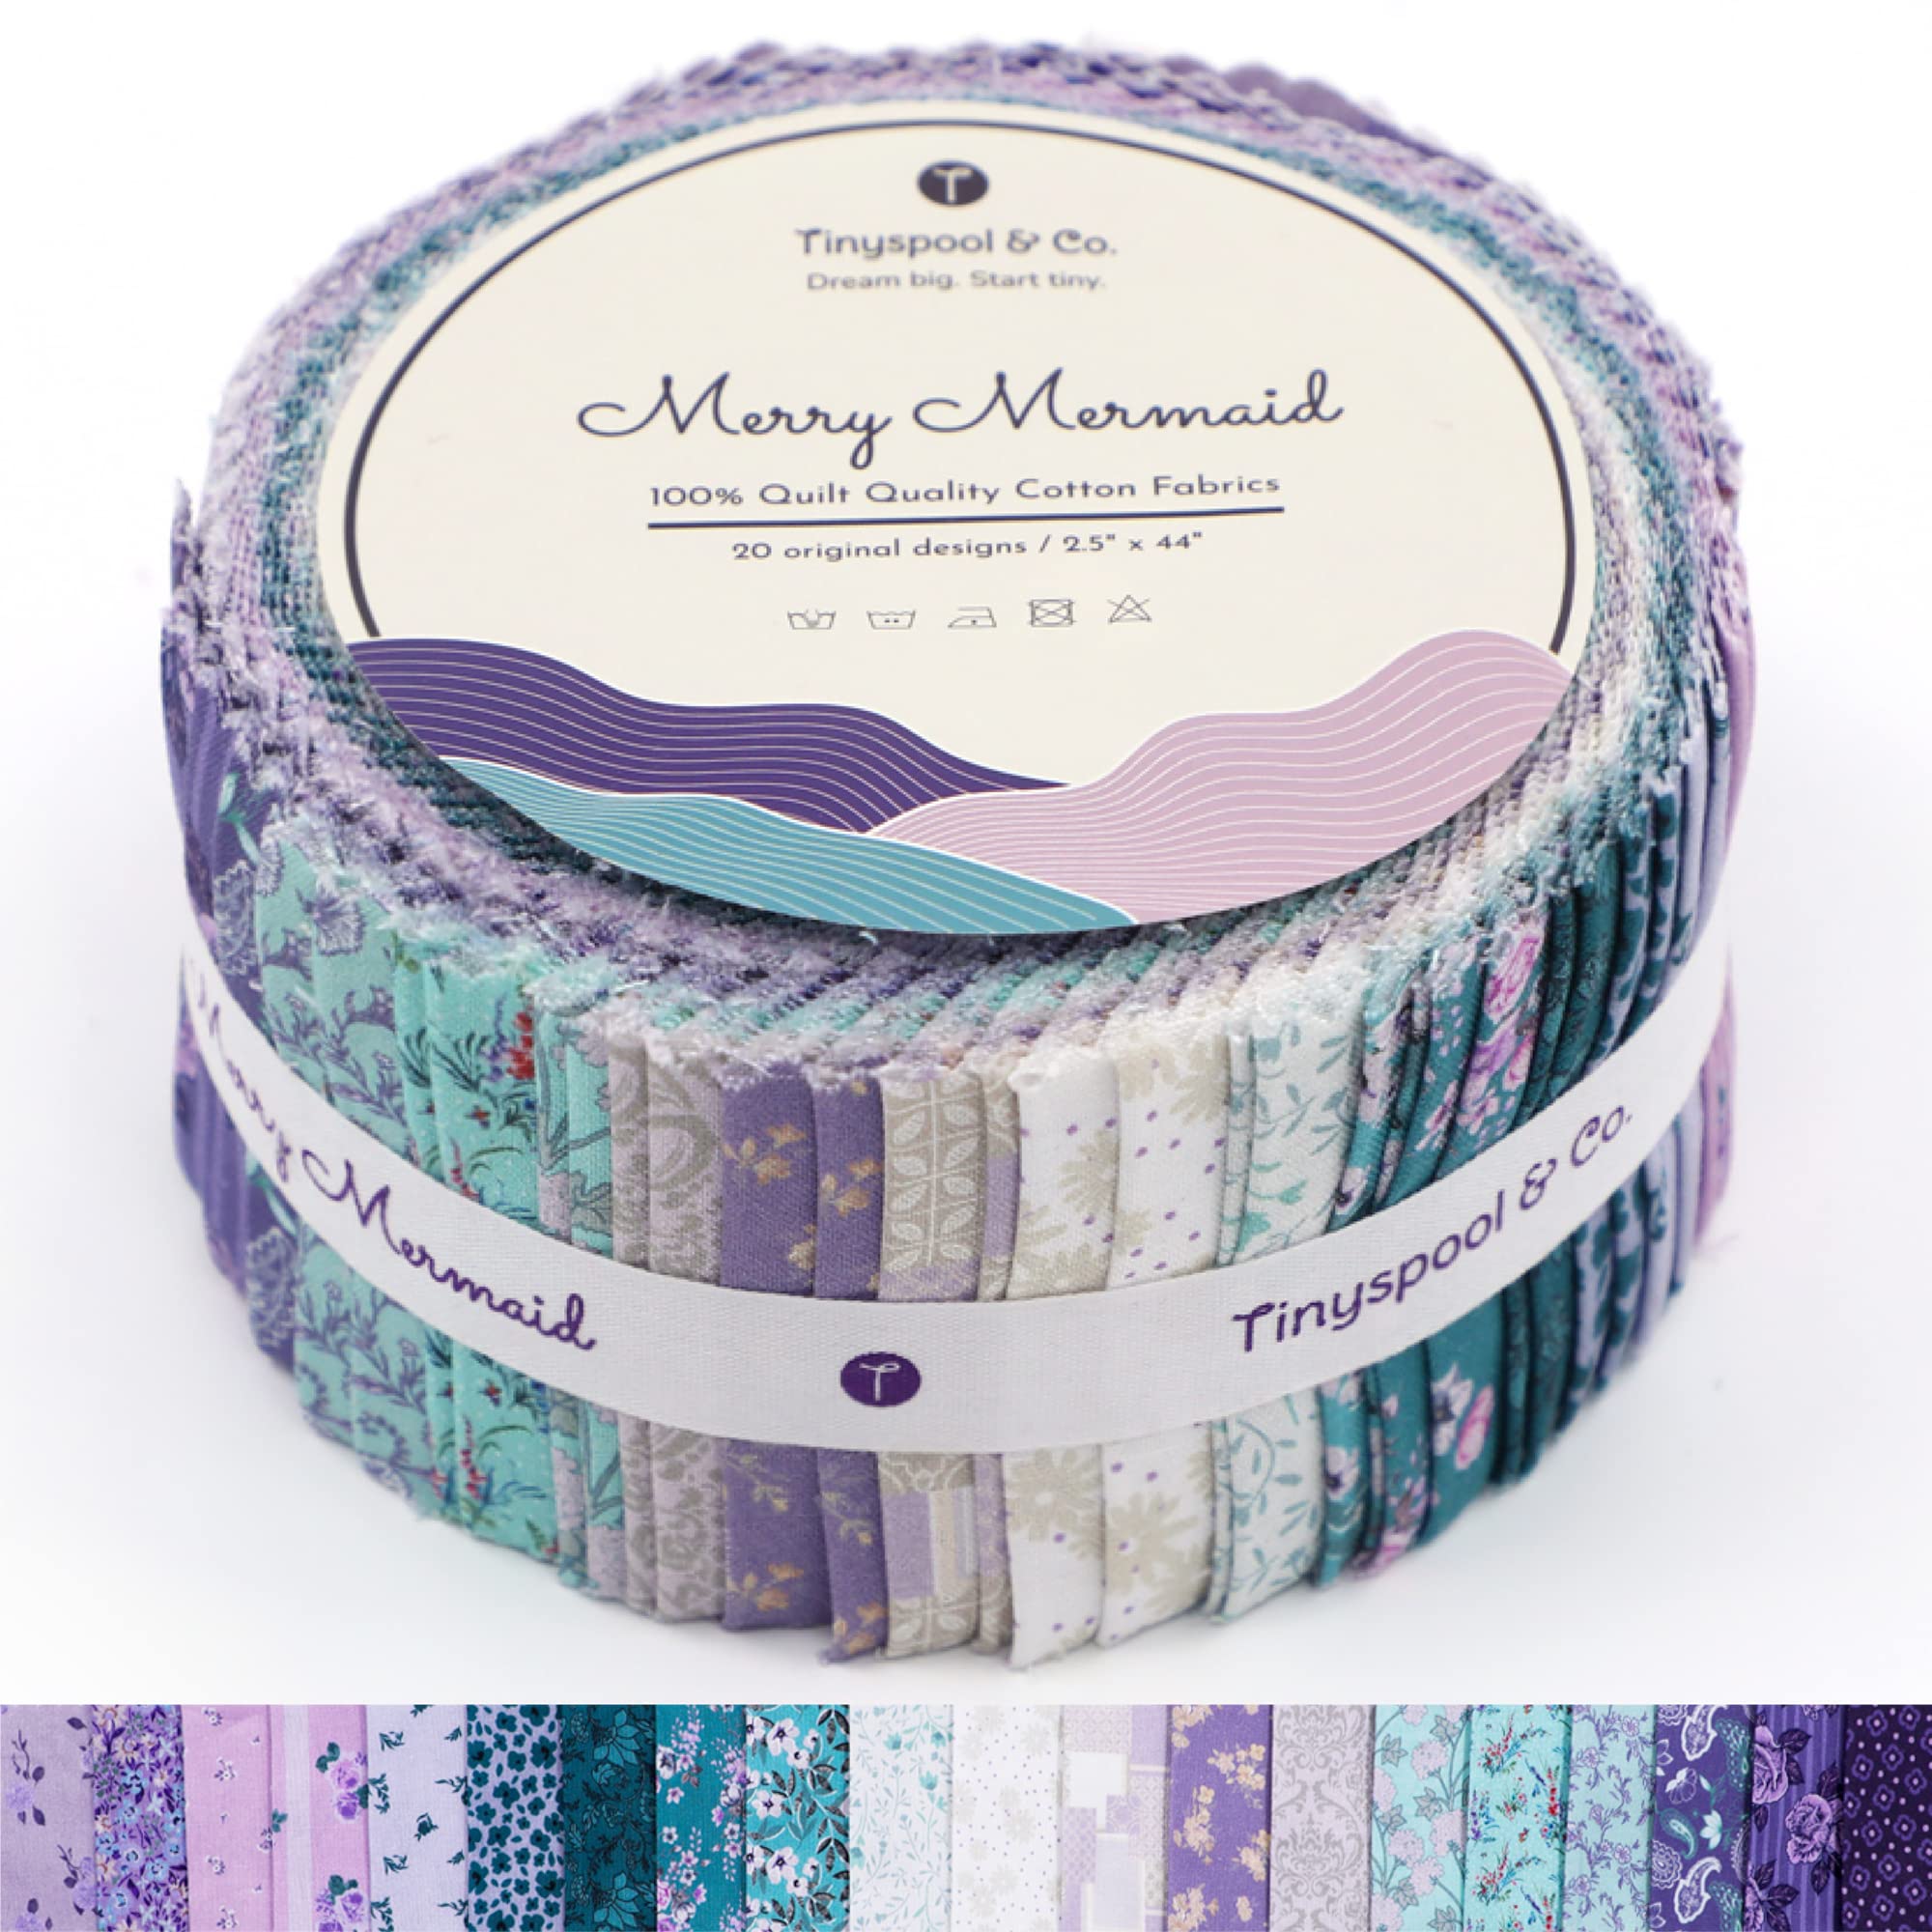 Tinyspool & Co. Jelly Roll Fabric Strips for Quilting, Crafting, and Sewing, 40 Strip Assorted Bundle, Soft Cotton for Blanket, Rug, Upholstery, Home Decor, and Purse Making, Merry Mermaid